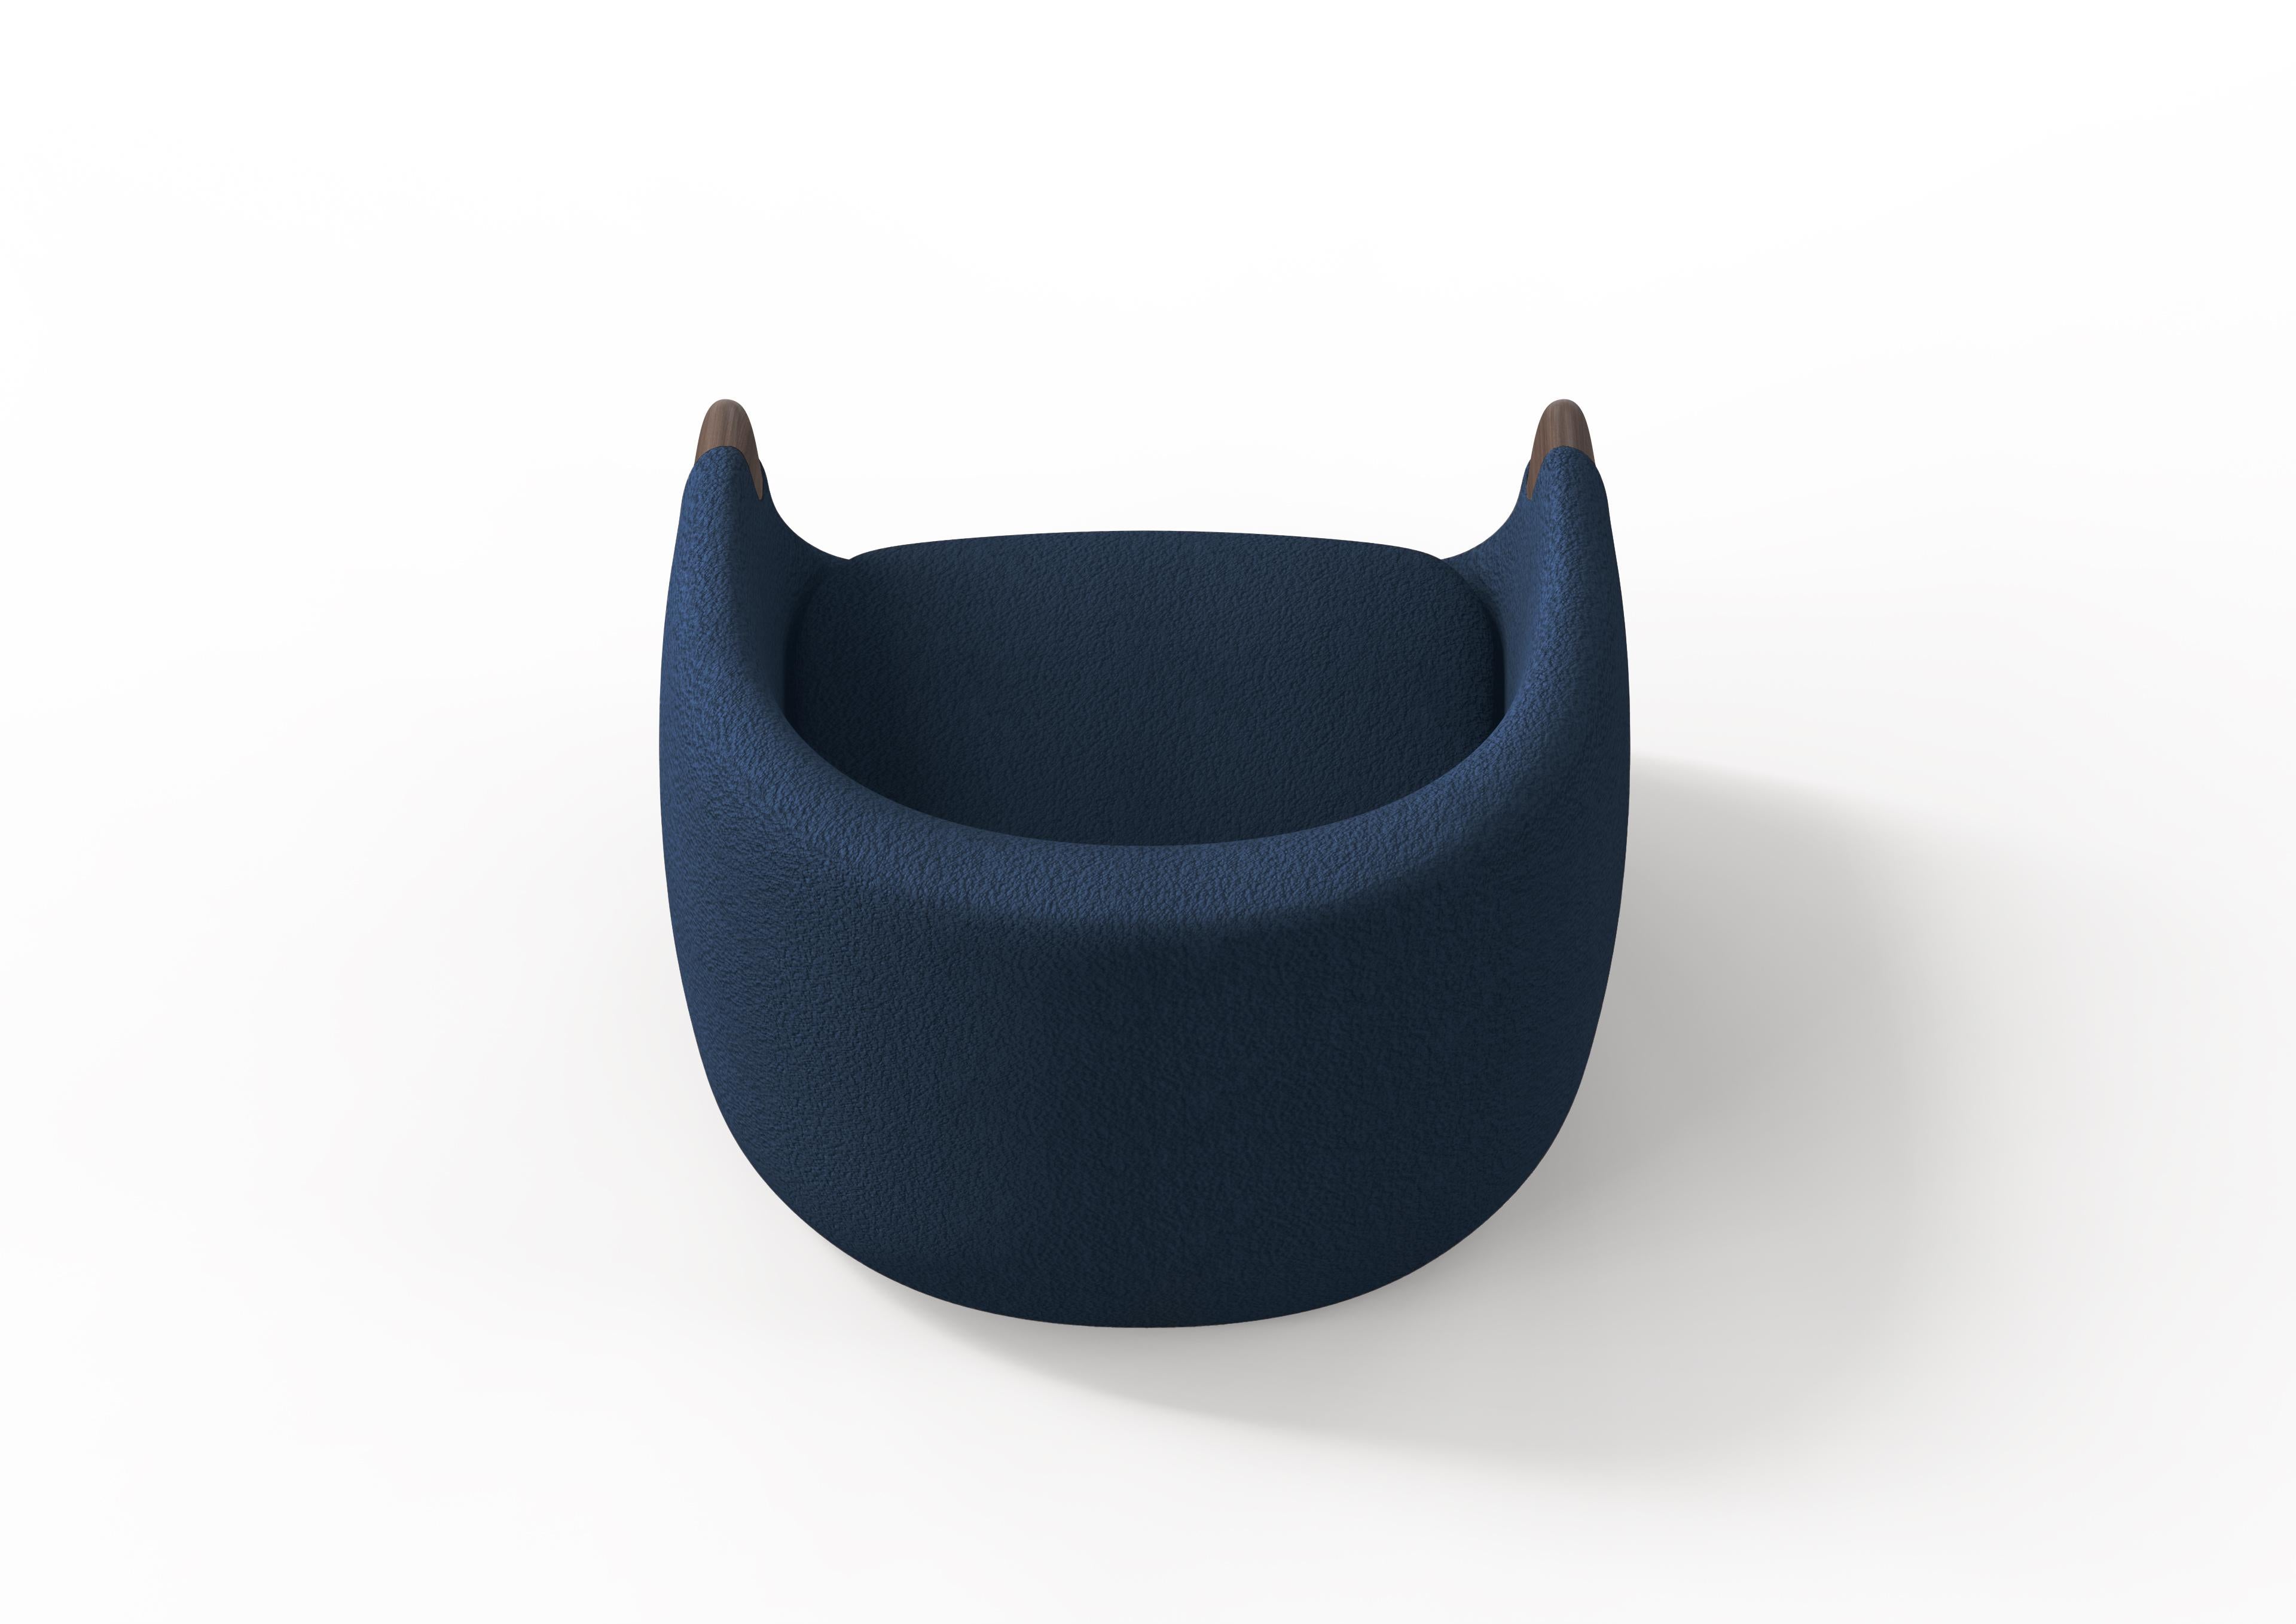 Bubble is a playful element. Its soft and organic shape is emphasized by the seat cushion embedded inside the shell. The cockpit shape aims to communicate great comfort, while its most characterizing detail, the solid wood handles that protrude from